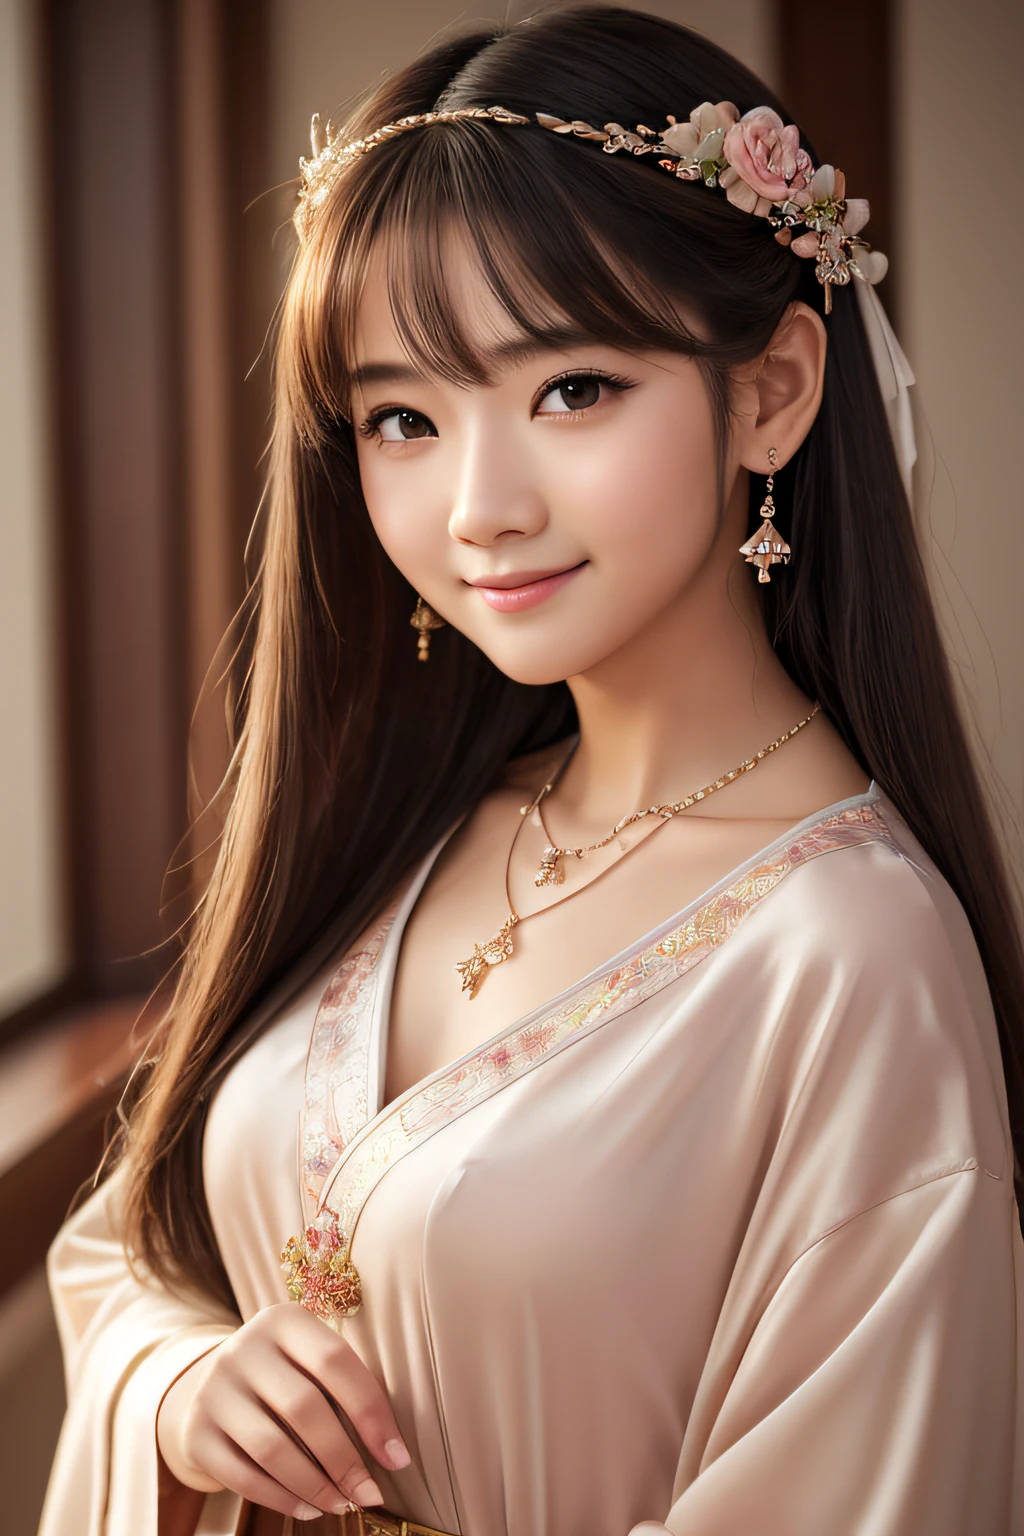 Superb quality, masutepiece, High resolution, 1girl in, blush, (Seductive smile: 0.8), Star pupil, Chinese Hanfu, Hair Accessories, Necklace, Jewelry, Beauty, SUI_Body, Tindall Effect, Realistic, shadow room, Light Edge, Two-tone lighting, (High Detail Skin: 1.2), 8K UHD, SLR, Soft light, High quality, Volume Lighting, candid picture, High resolution, 4K, 8K, Background blur, Real person